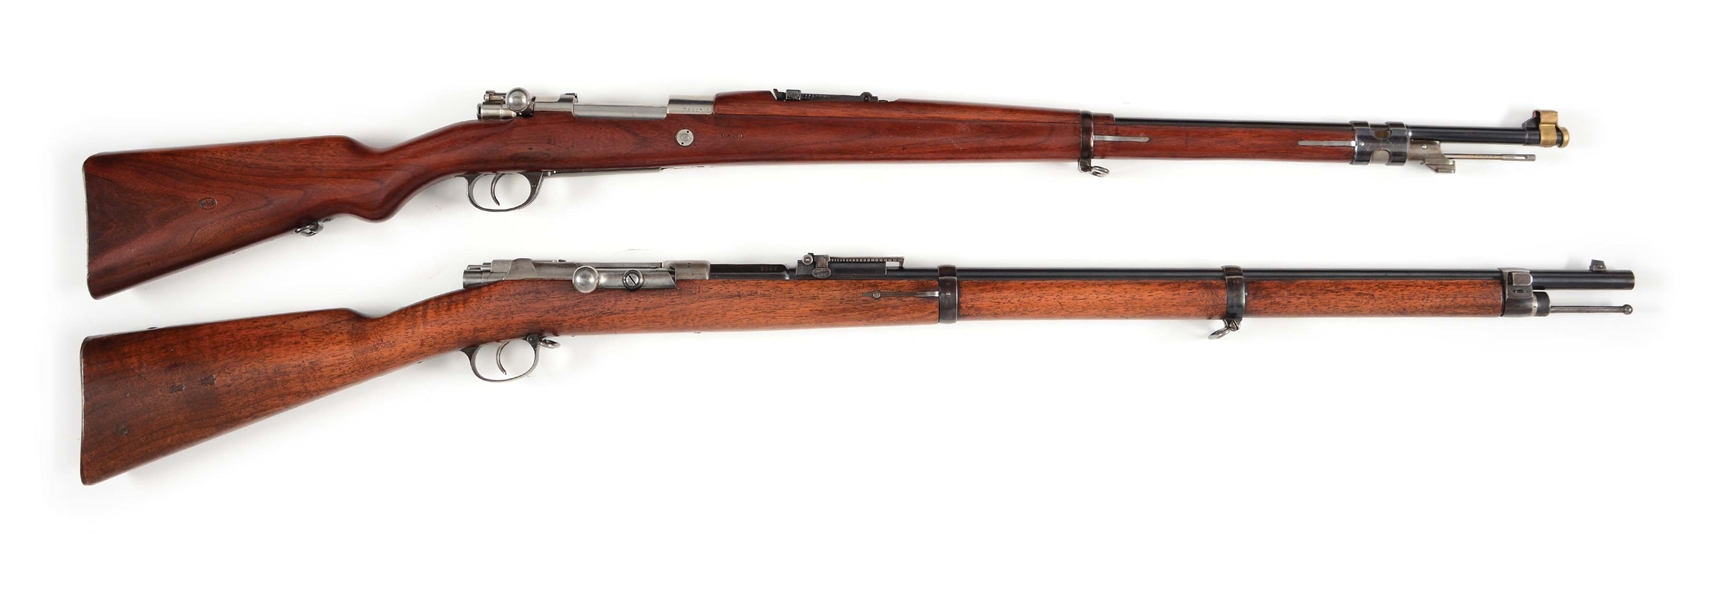 (C+A) LOT OF 2: MAUSER STYLE MILITARY RIFLES - DWM 1909 ARGENTINE AND AMBERG 71/84.